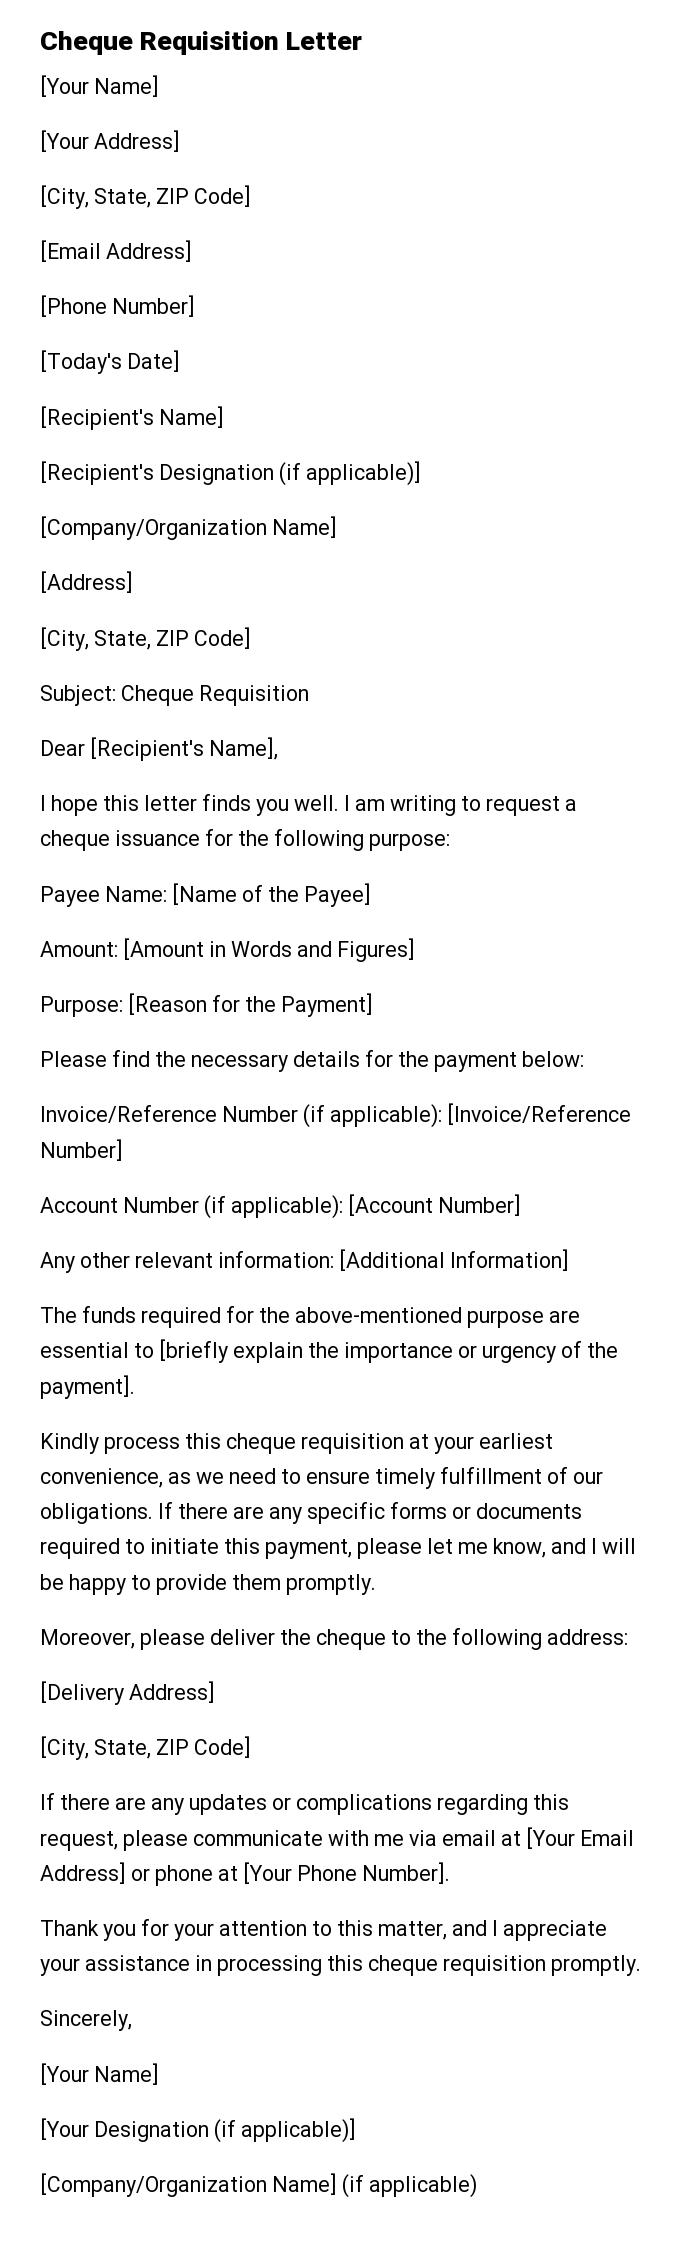 Cheque Requisition Letter